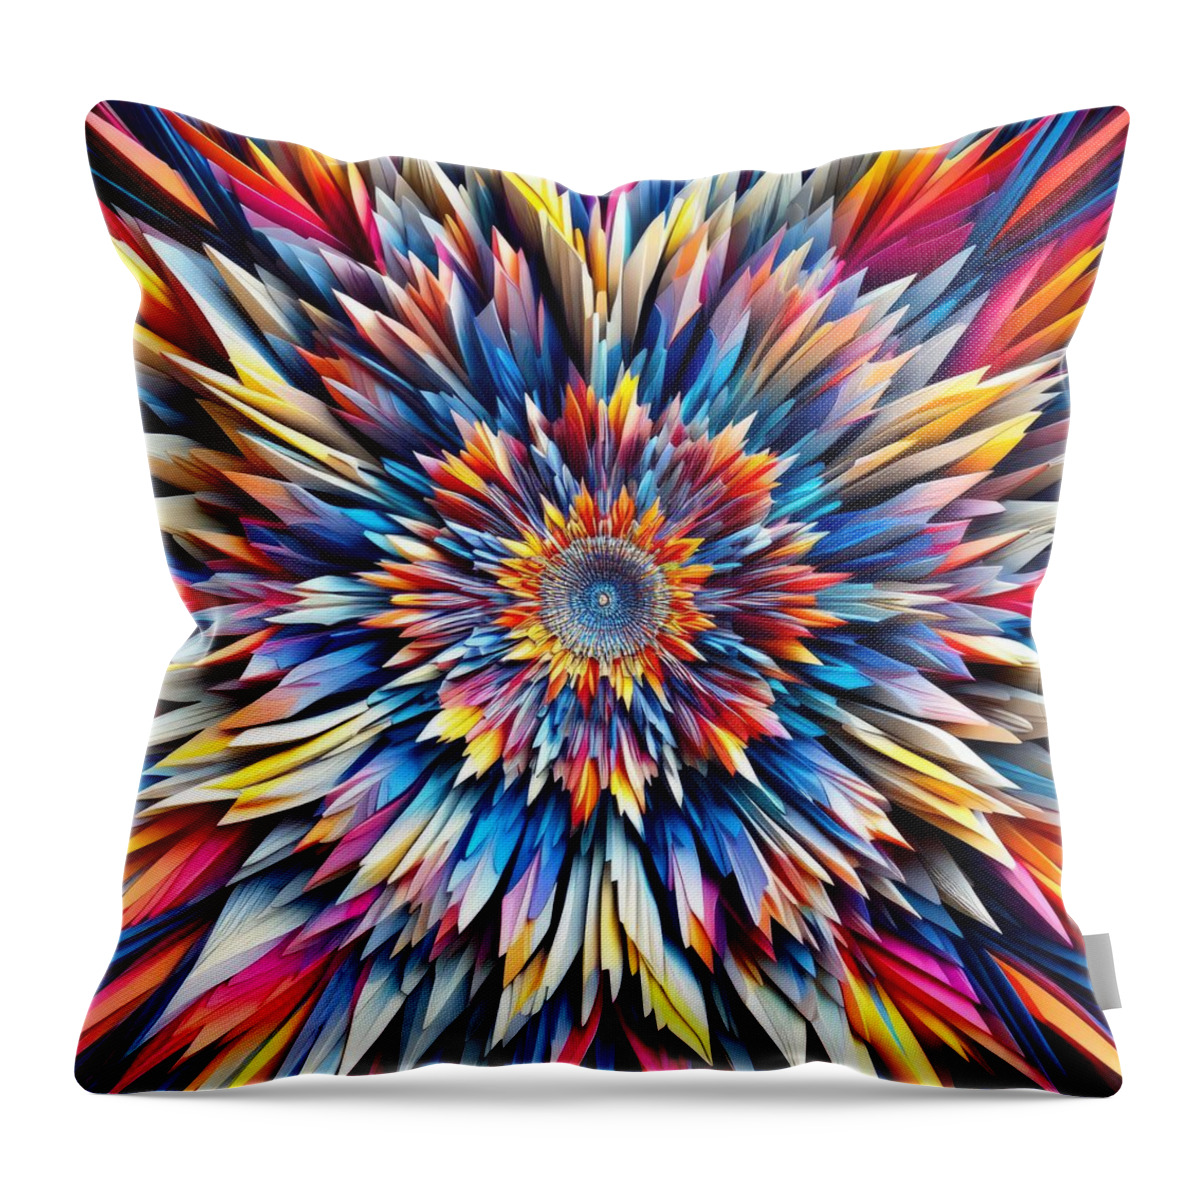 Abstract Throw Pillow featuring the photograph Mandala - Vibrant Vortex by Bill and Linda Tiepelman